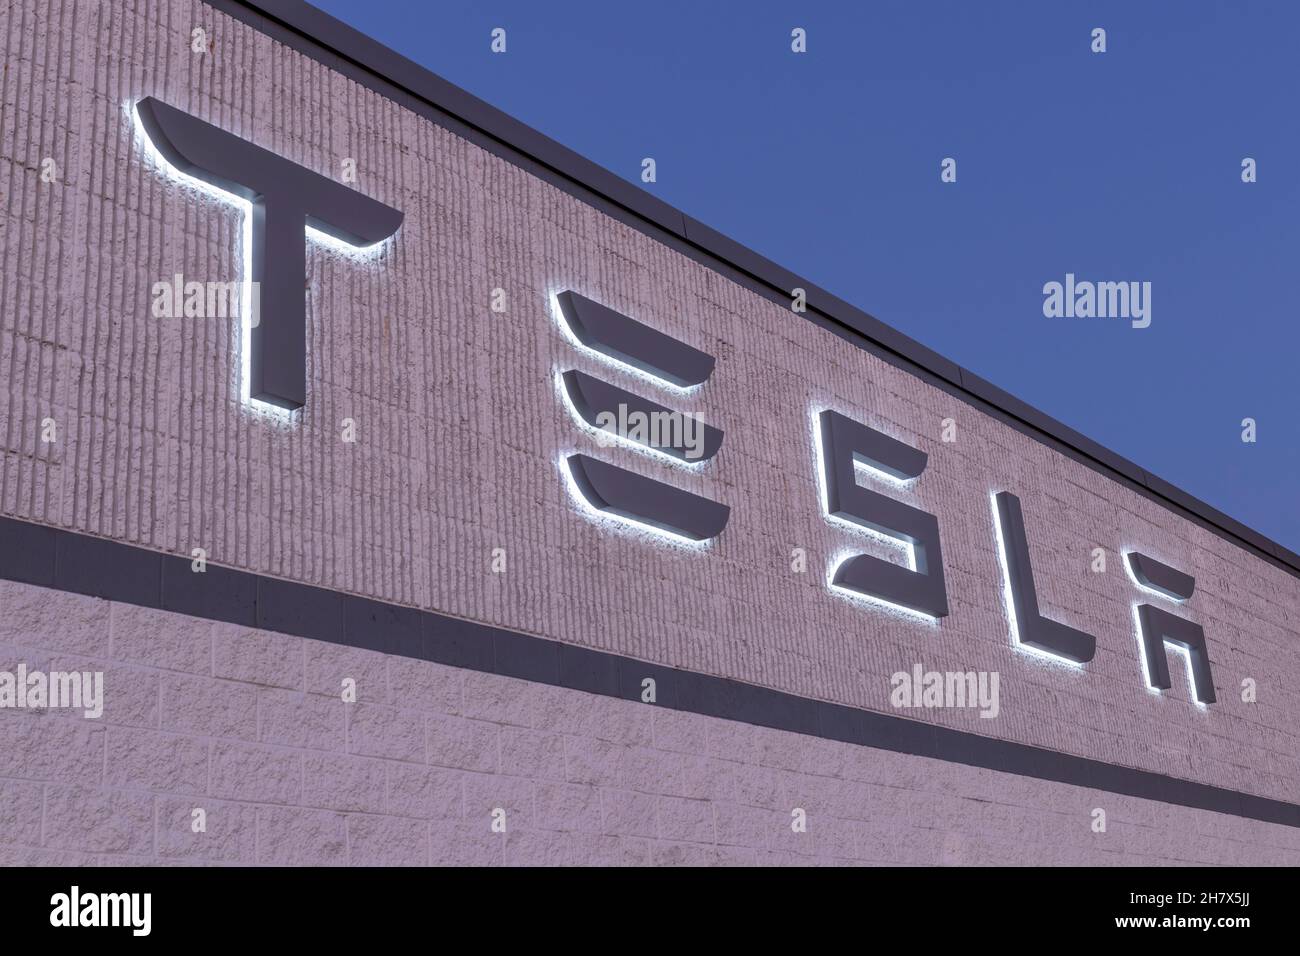 Indianapolis - Circa November 2021: Tesla electric vehicles logo. Tesla products include electric cars, battery energy storage and solar panels. Stock Photo